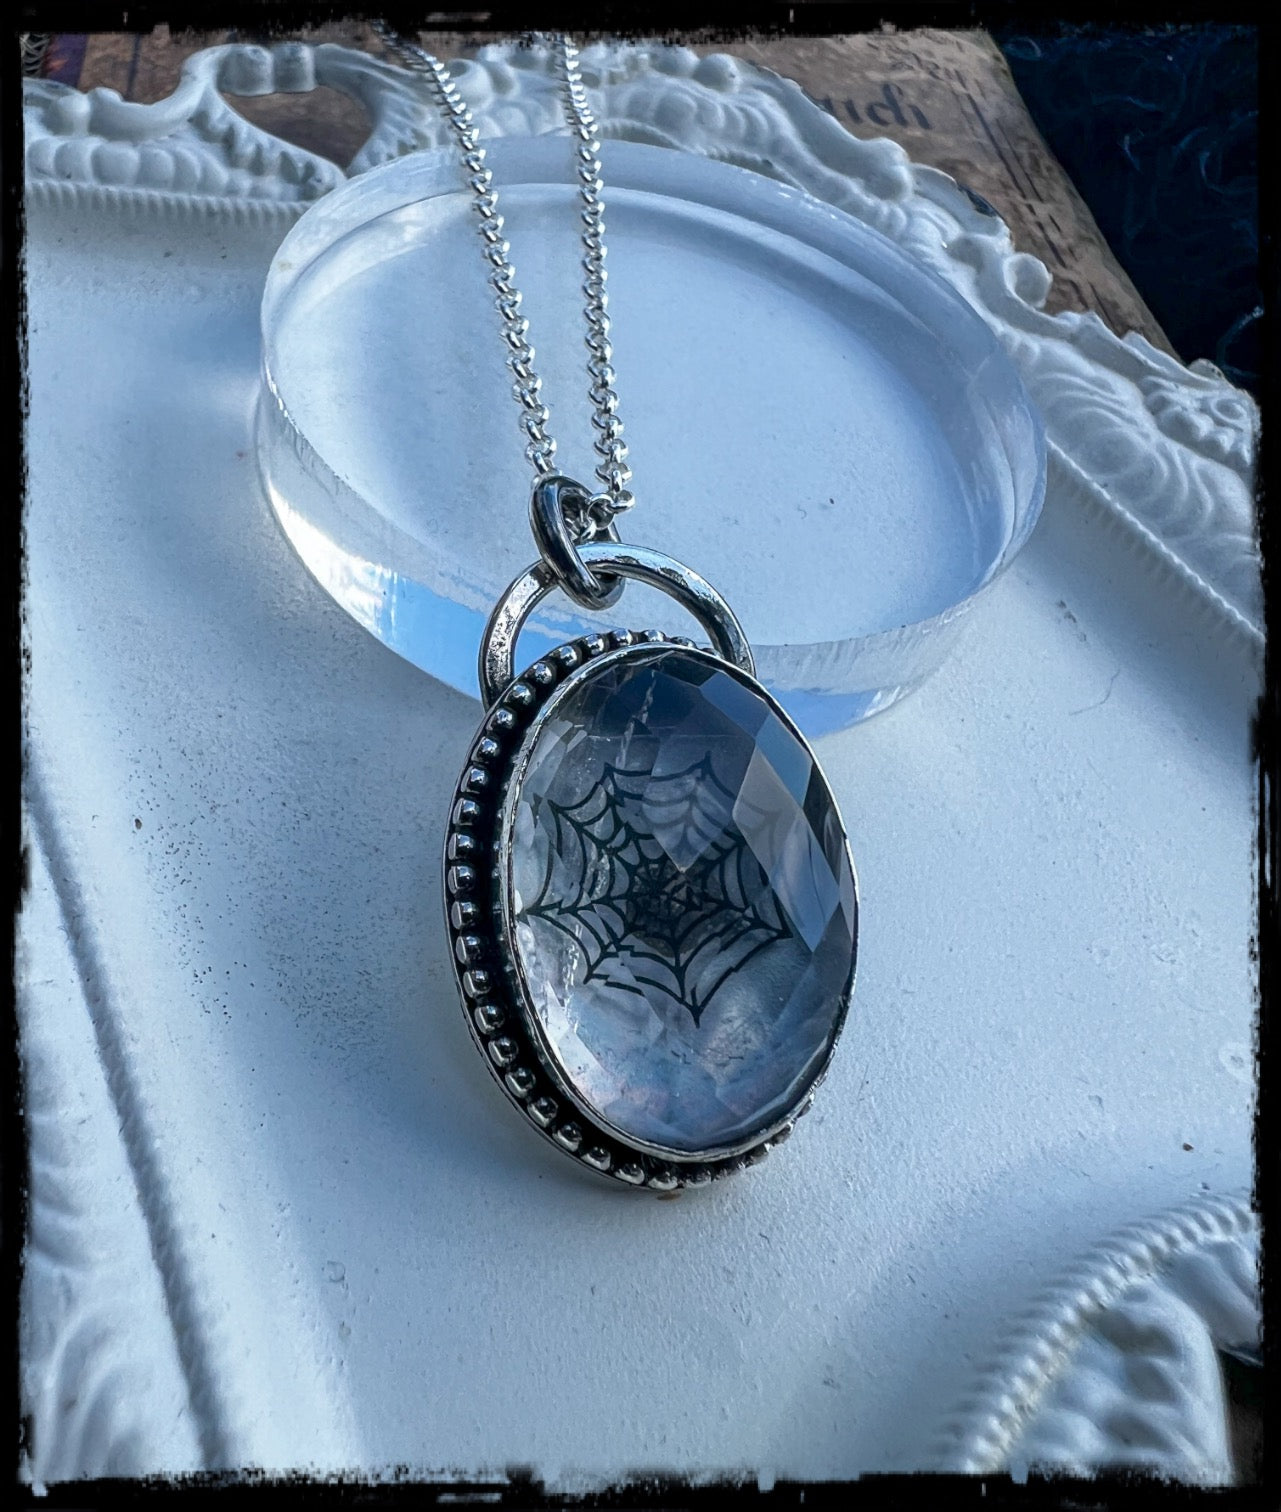 Handcrafted sterling and fine silver rose cut Himalayan quartz doublet with encased spiderweb etching pendant necklace ~